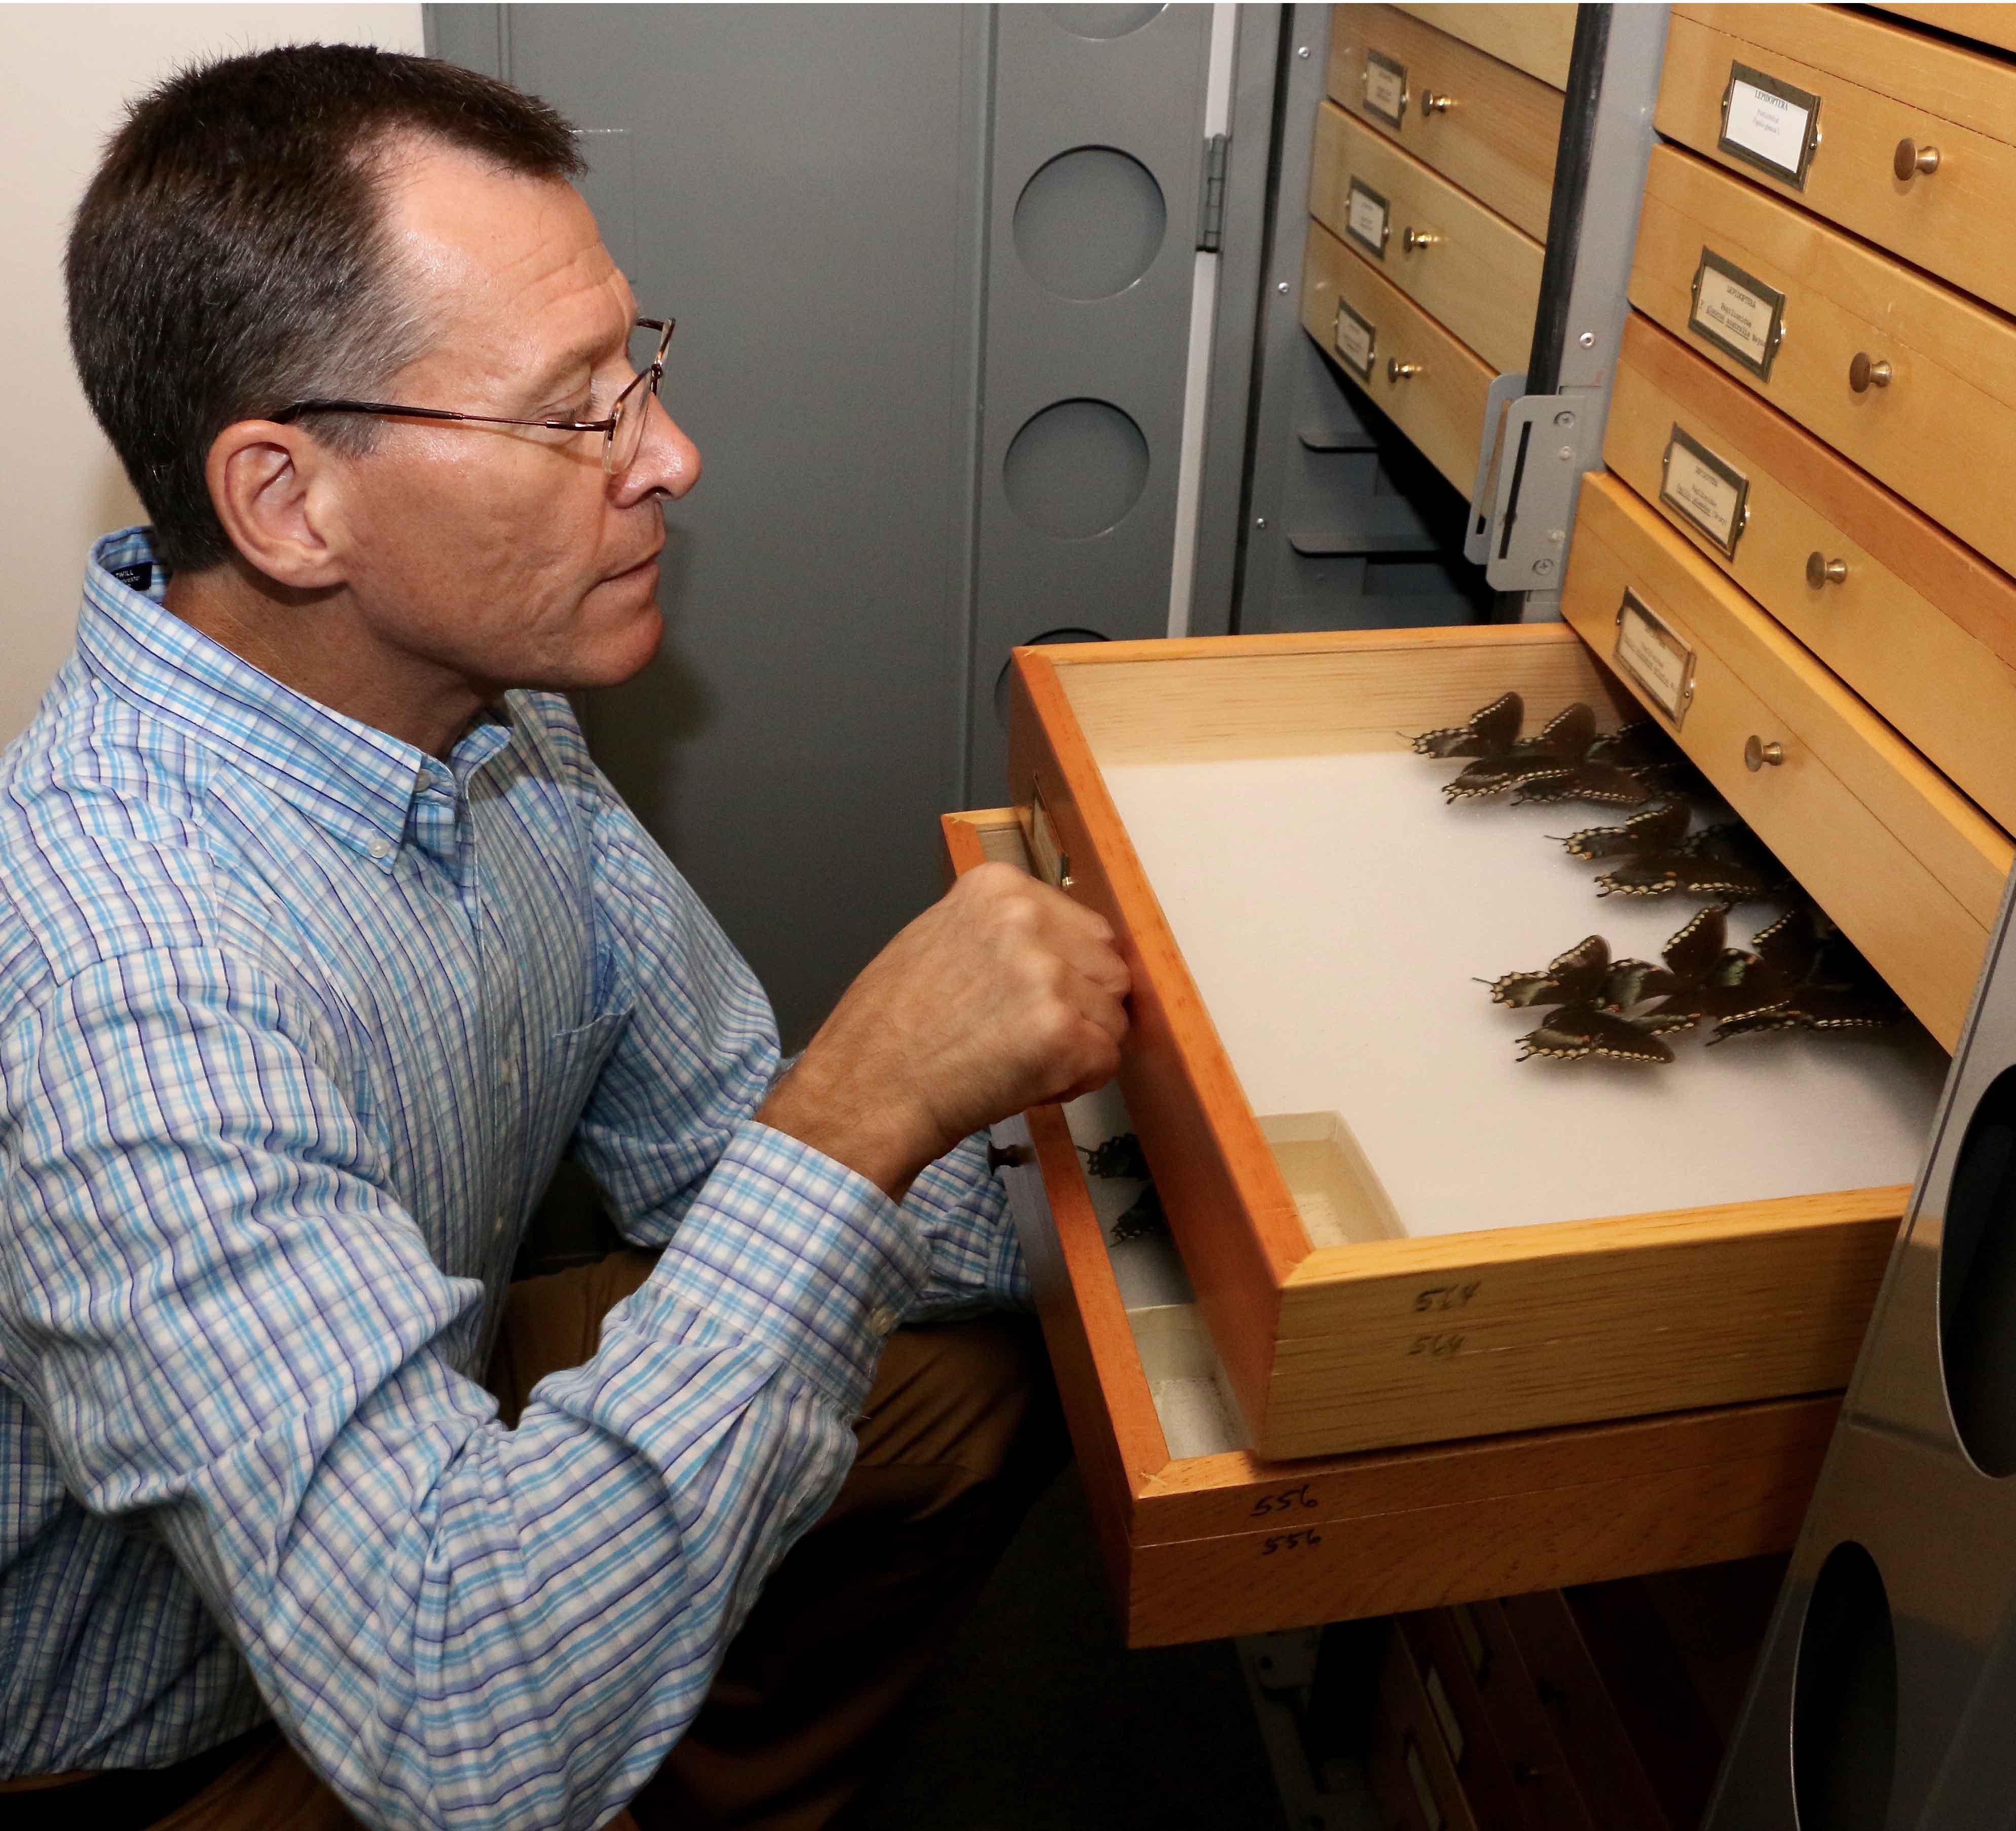 As part of the LepNet project, Joe McHugh, professor of entomology at the UGA College of Agricultural and Environmental Sciences and curator of the arthropod collection at the Georgia Museum of Natural History, will help lead the effort to digitize millions of butterfly and moth specimens now locked away in museum collections across the nation.